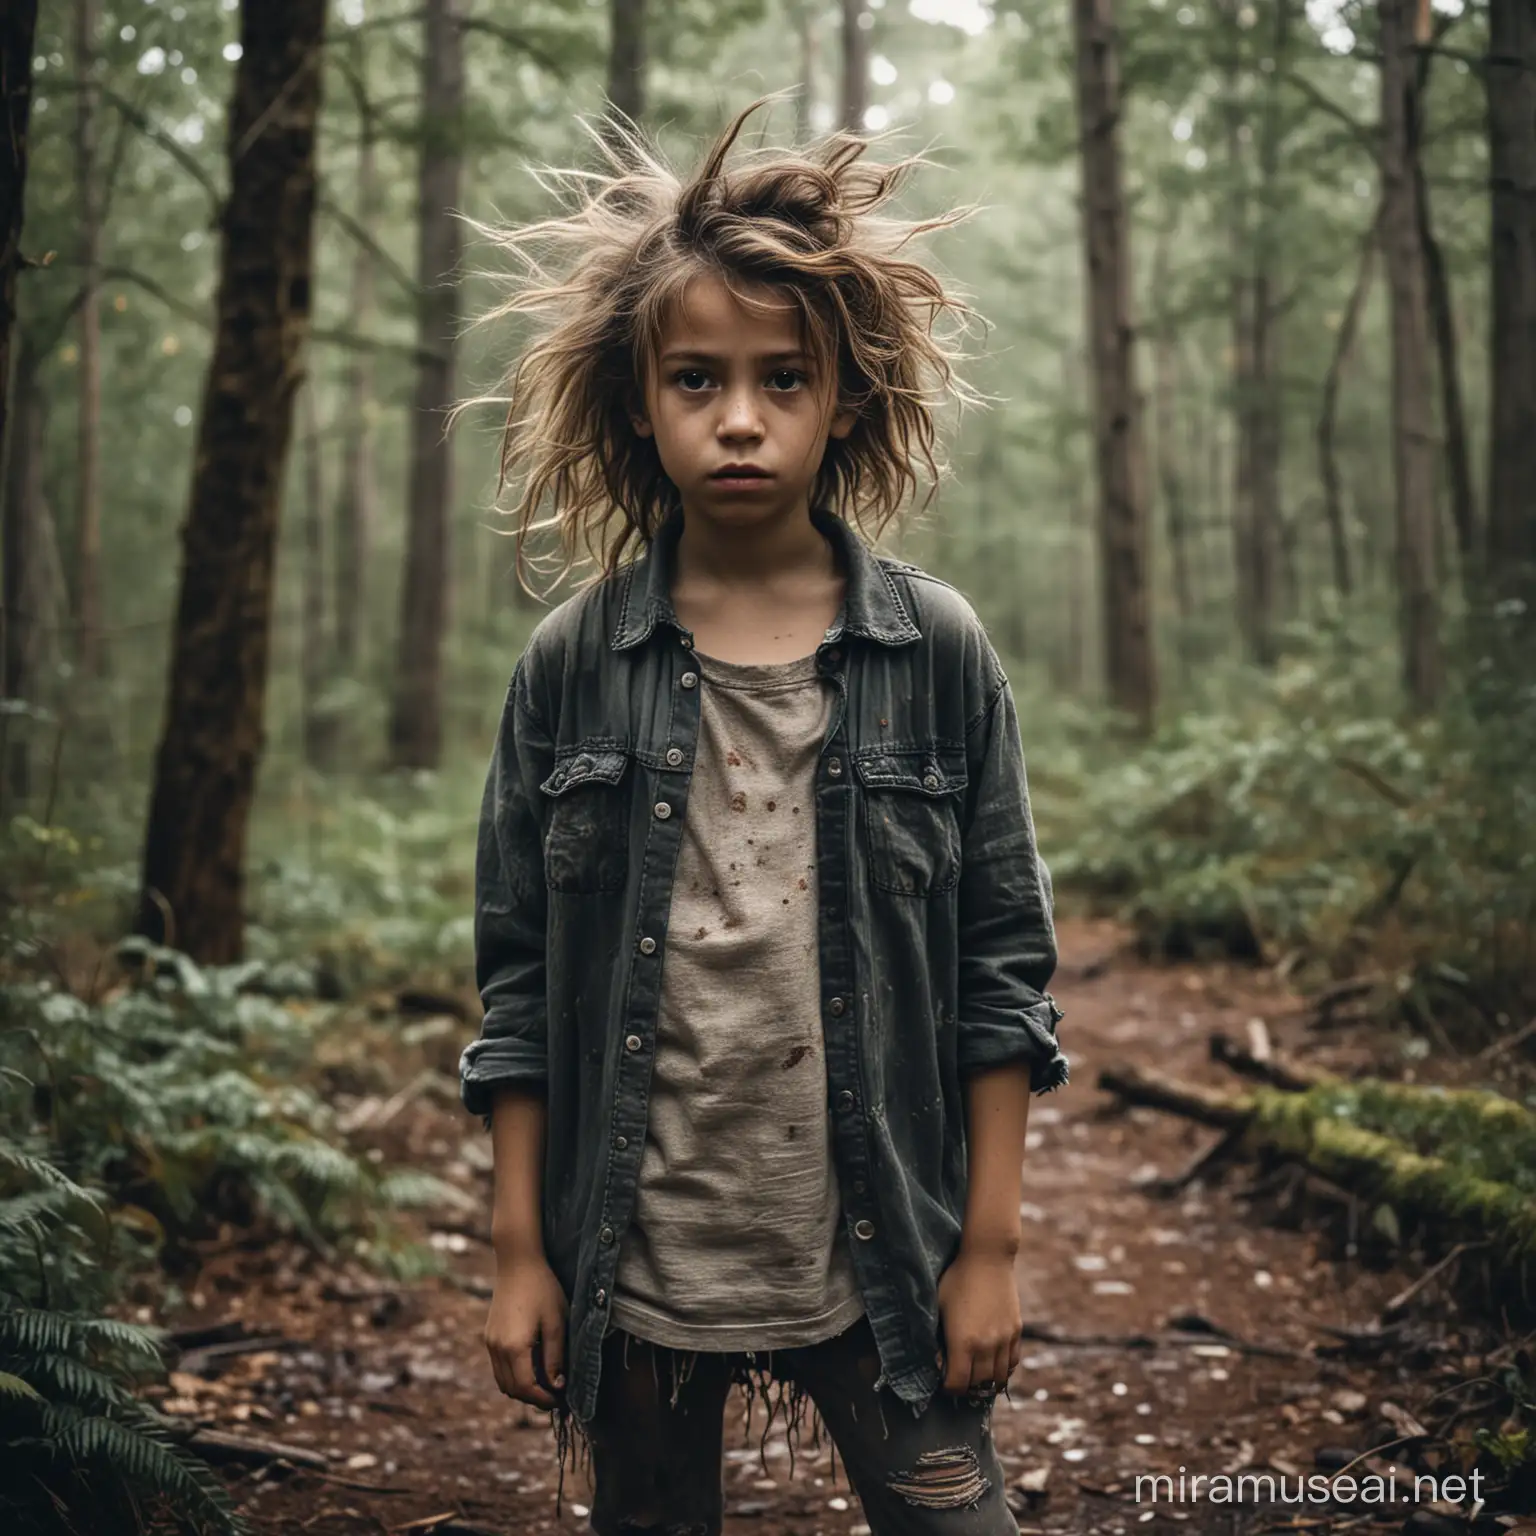 aa young girl with crazy, dirty and messy hair wearing old and ratty clothes standing in a moody forest.